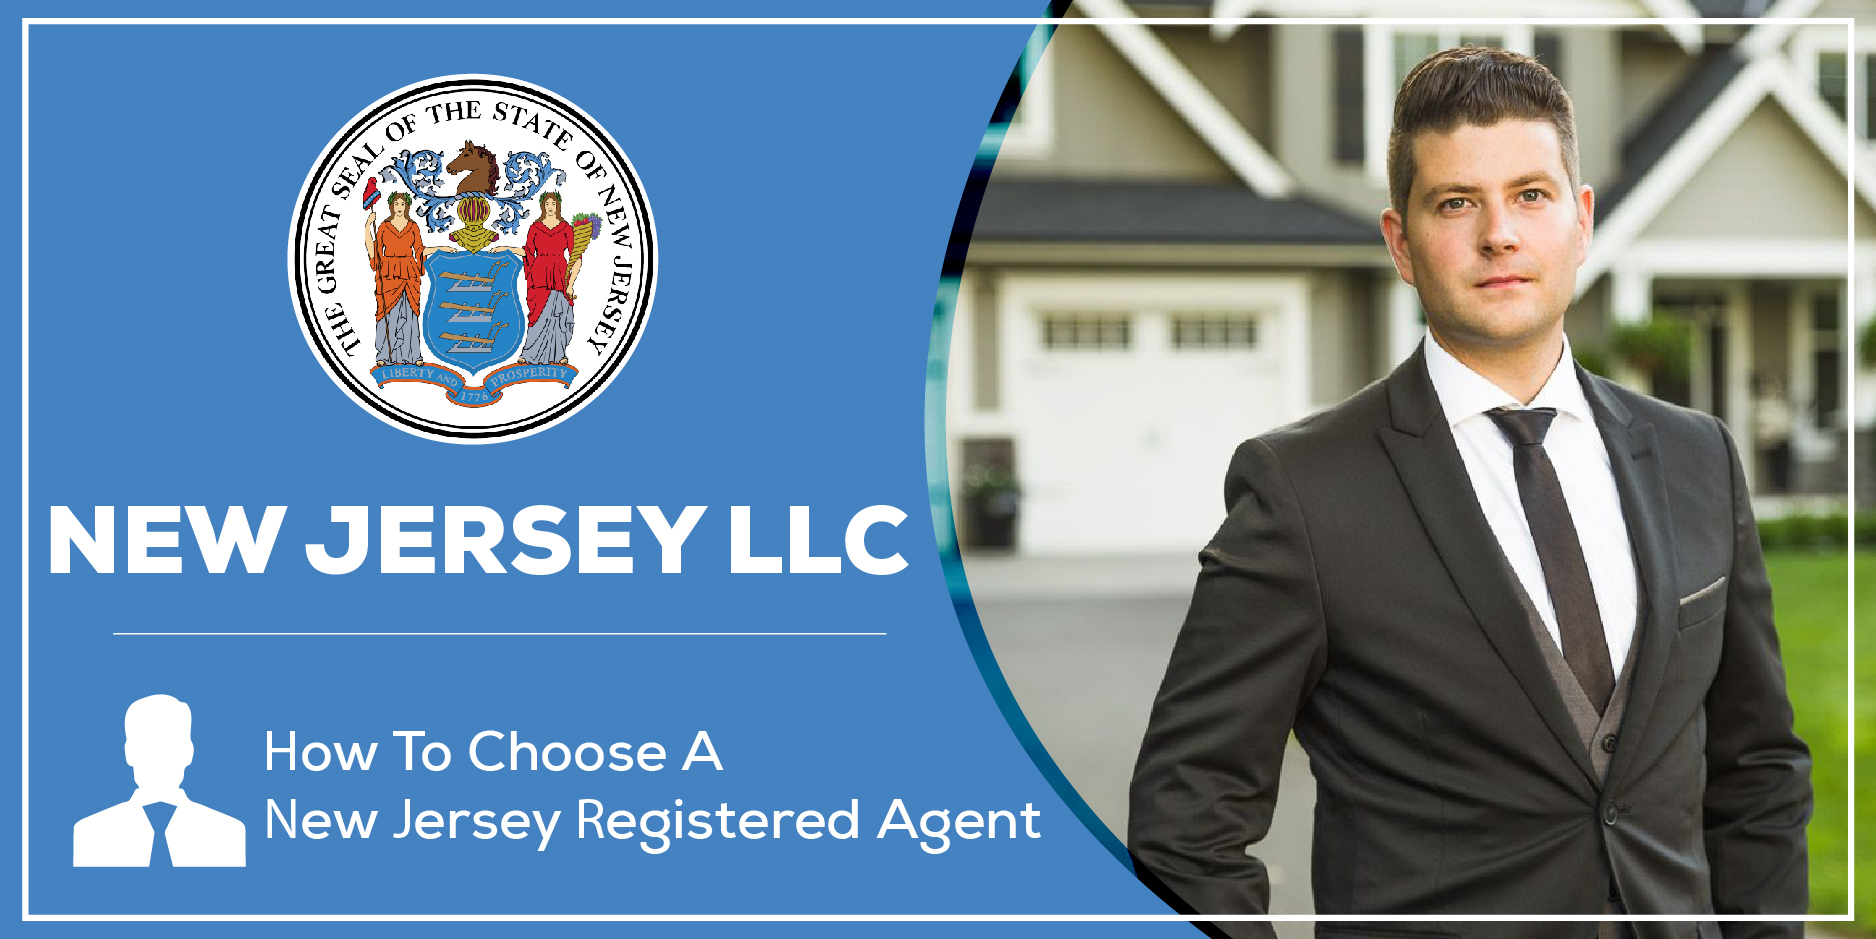 New Jersey Registered Agent